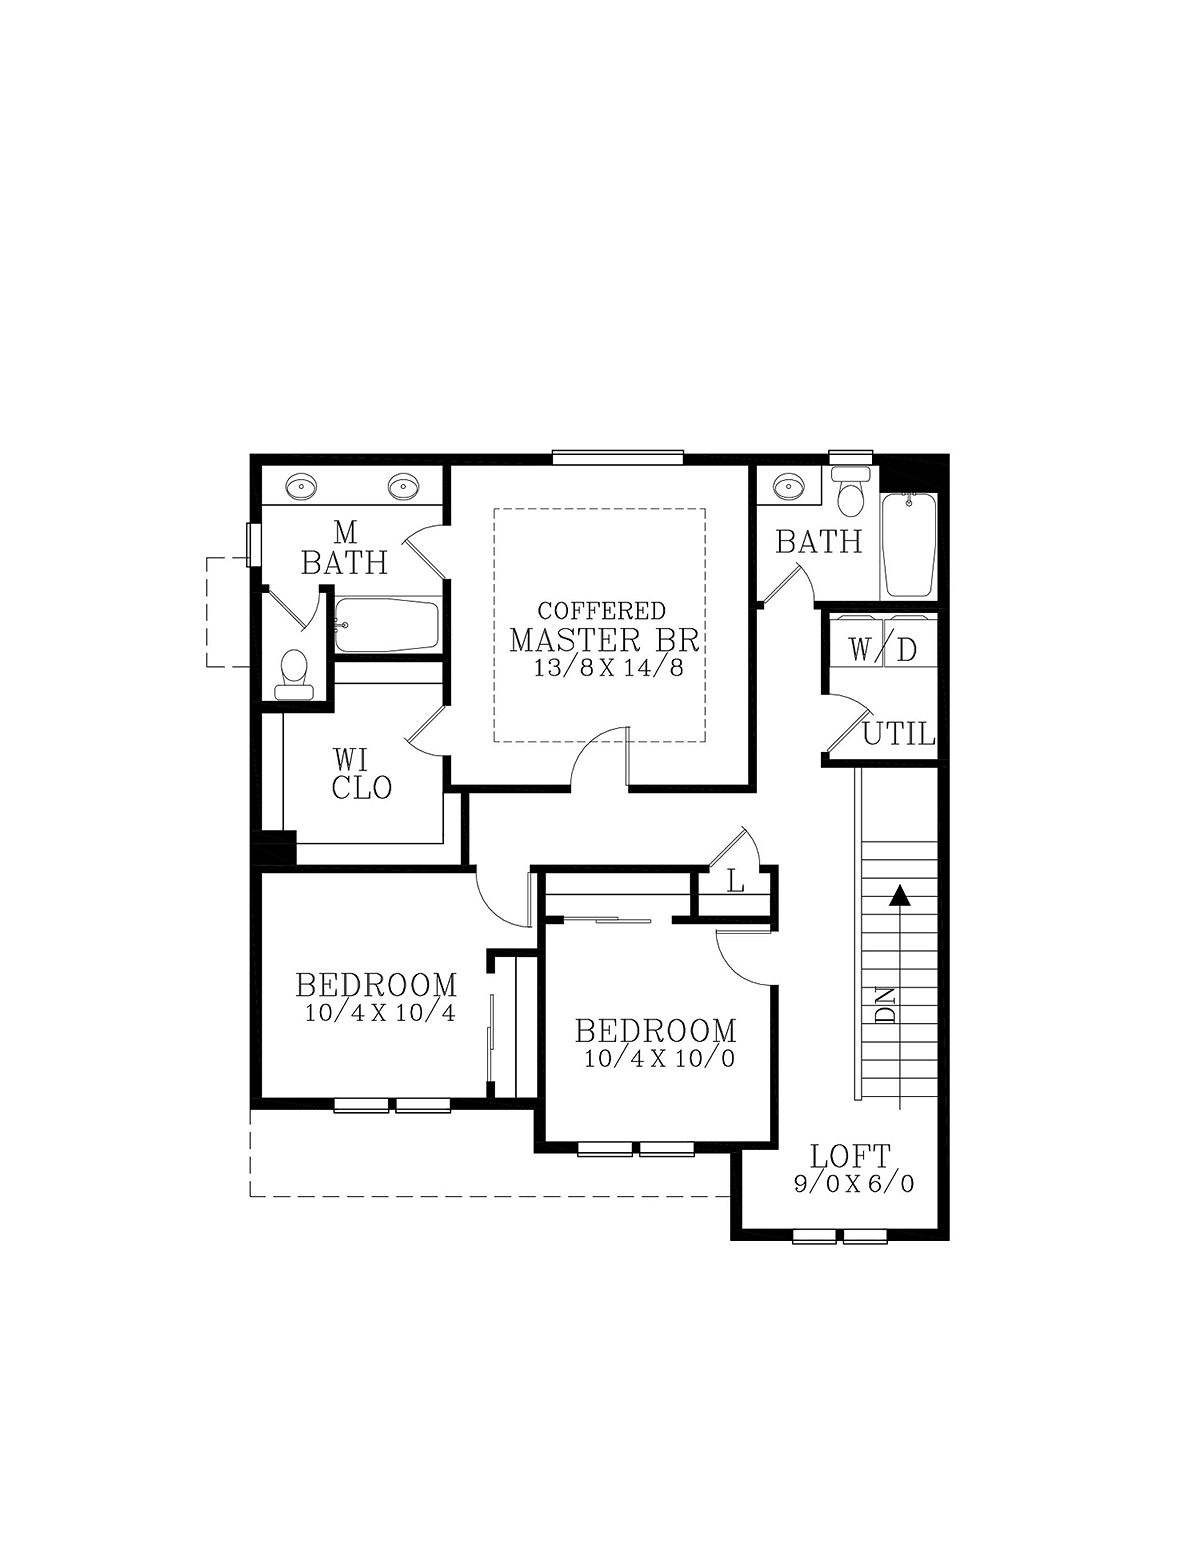 New House Plans Stay Up To Date With New House Floor Plans